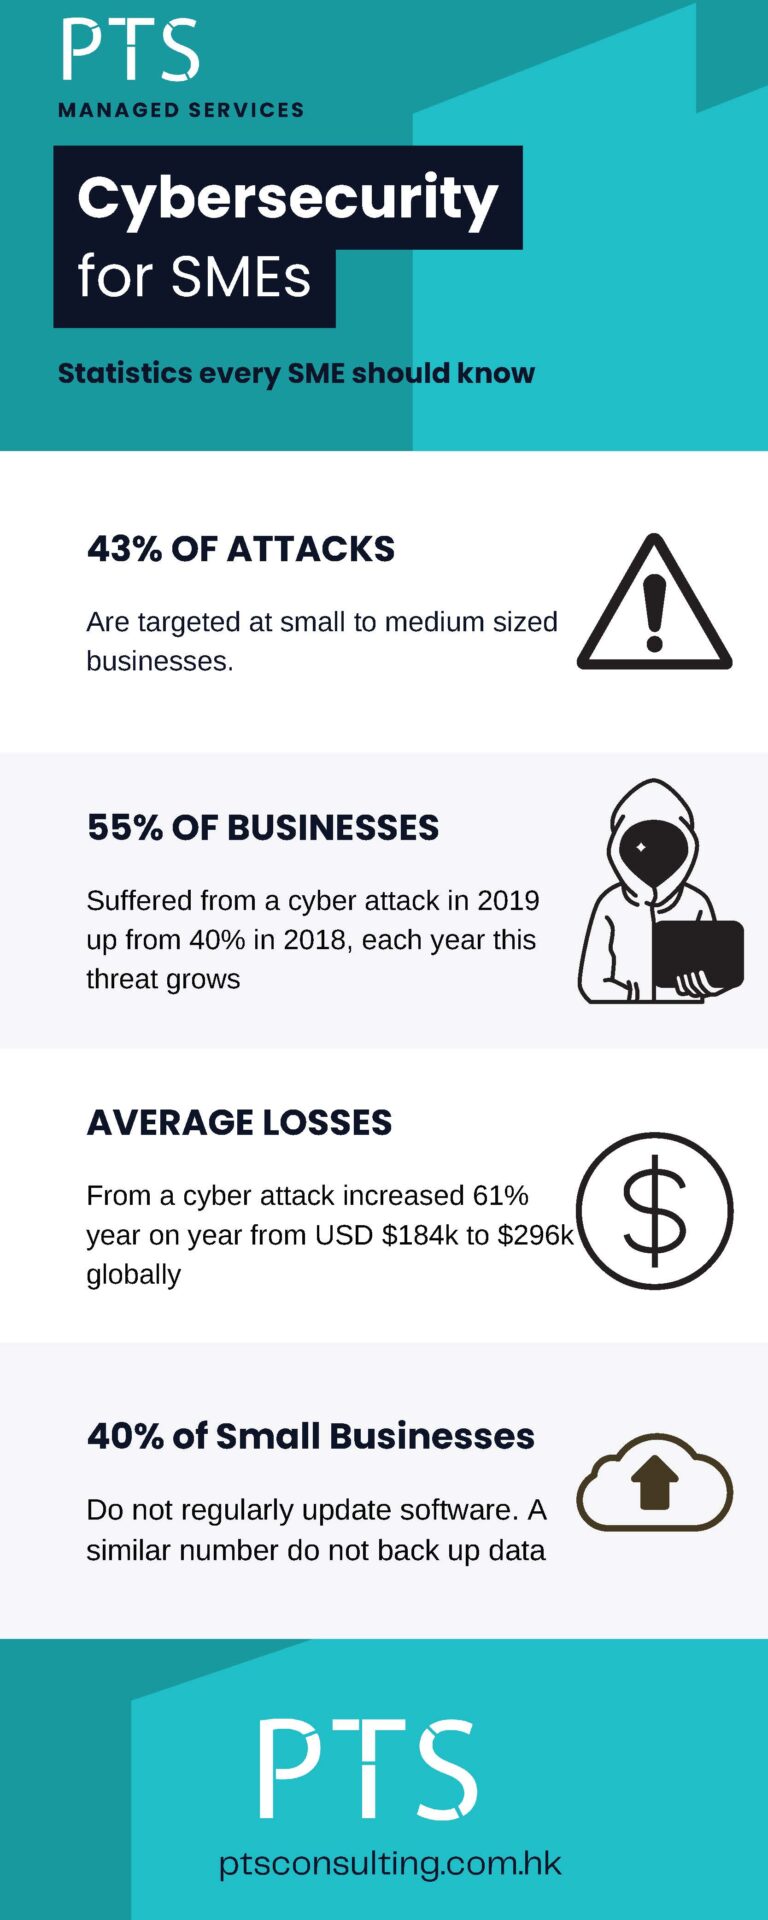 PTS Managed Services cybersecurity infographic